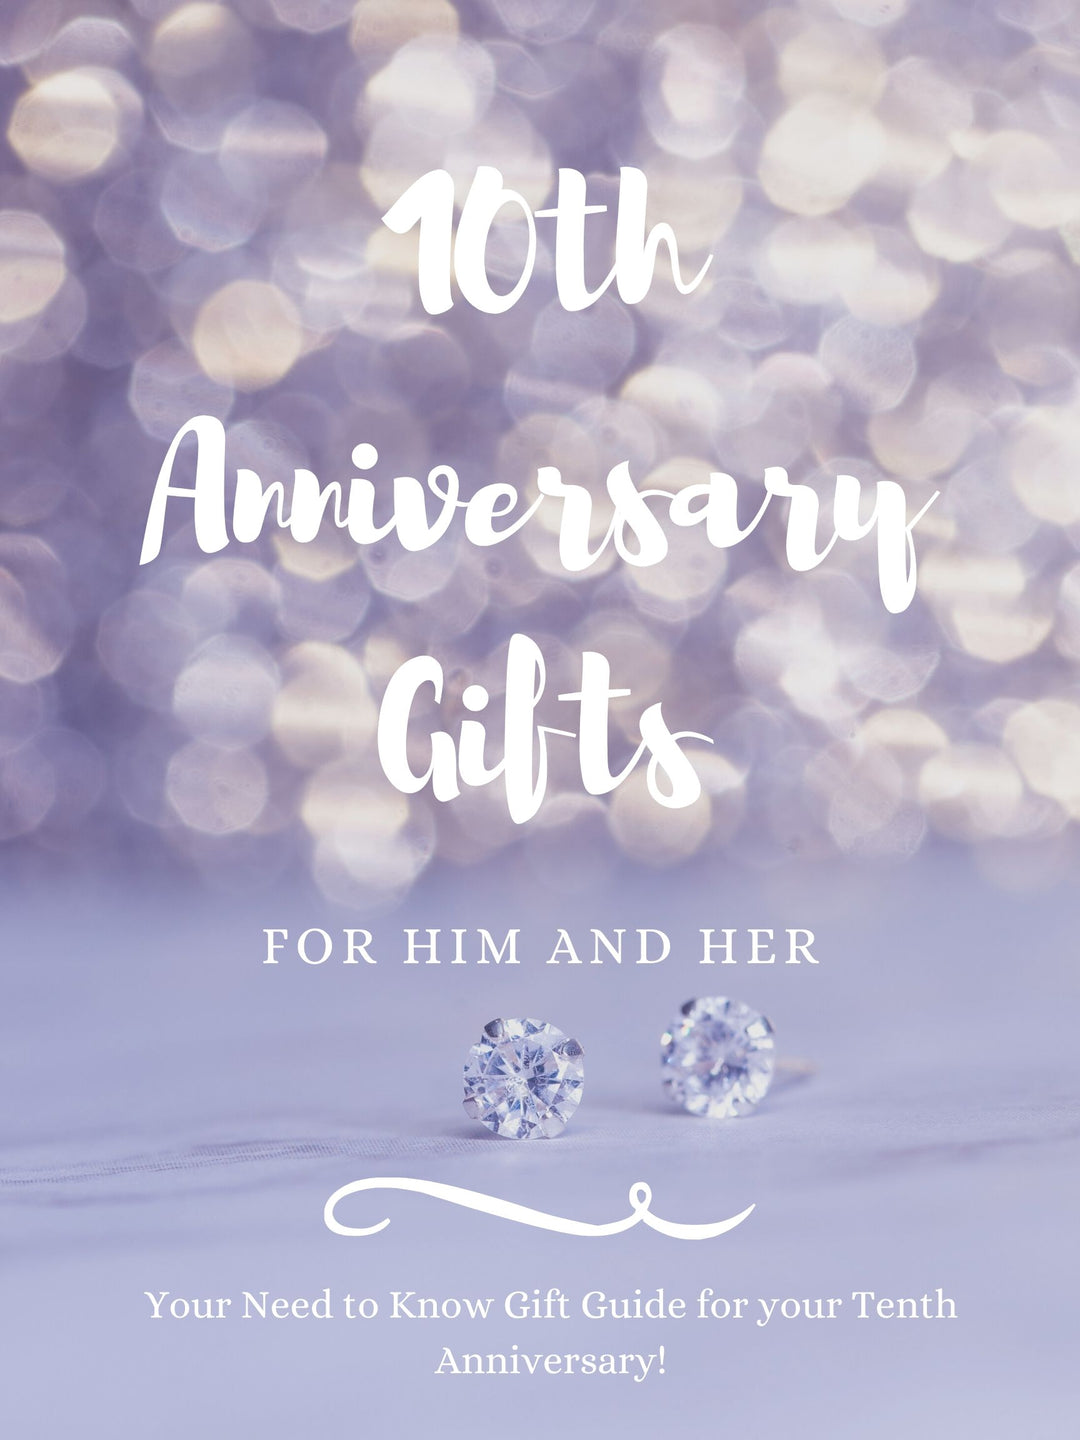 10th Anniversary Gifts for Him and Her